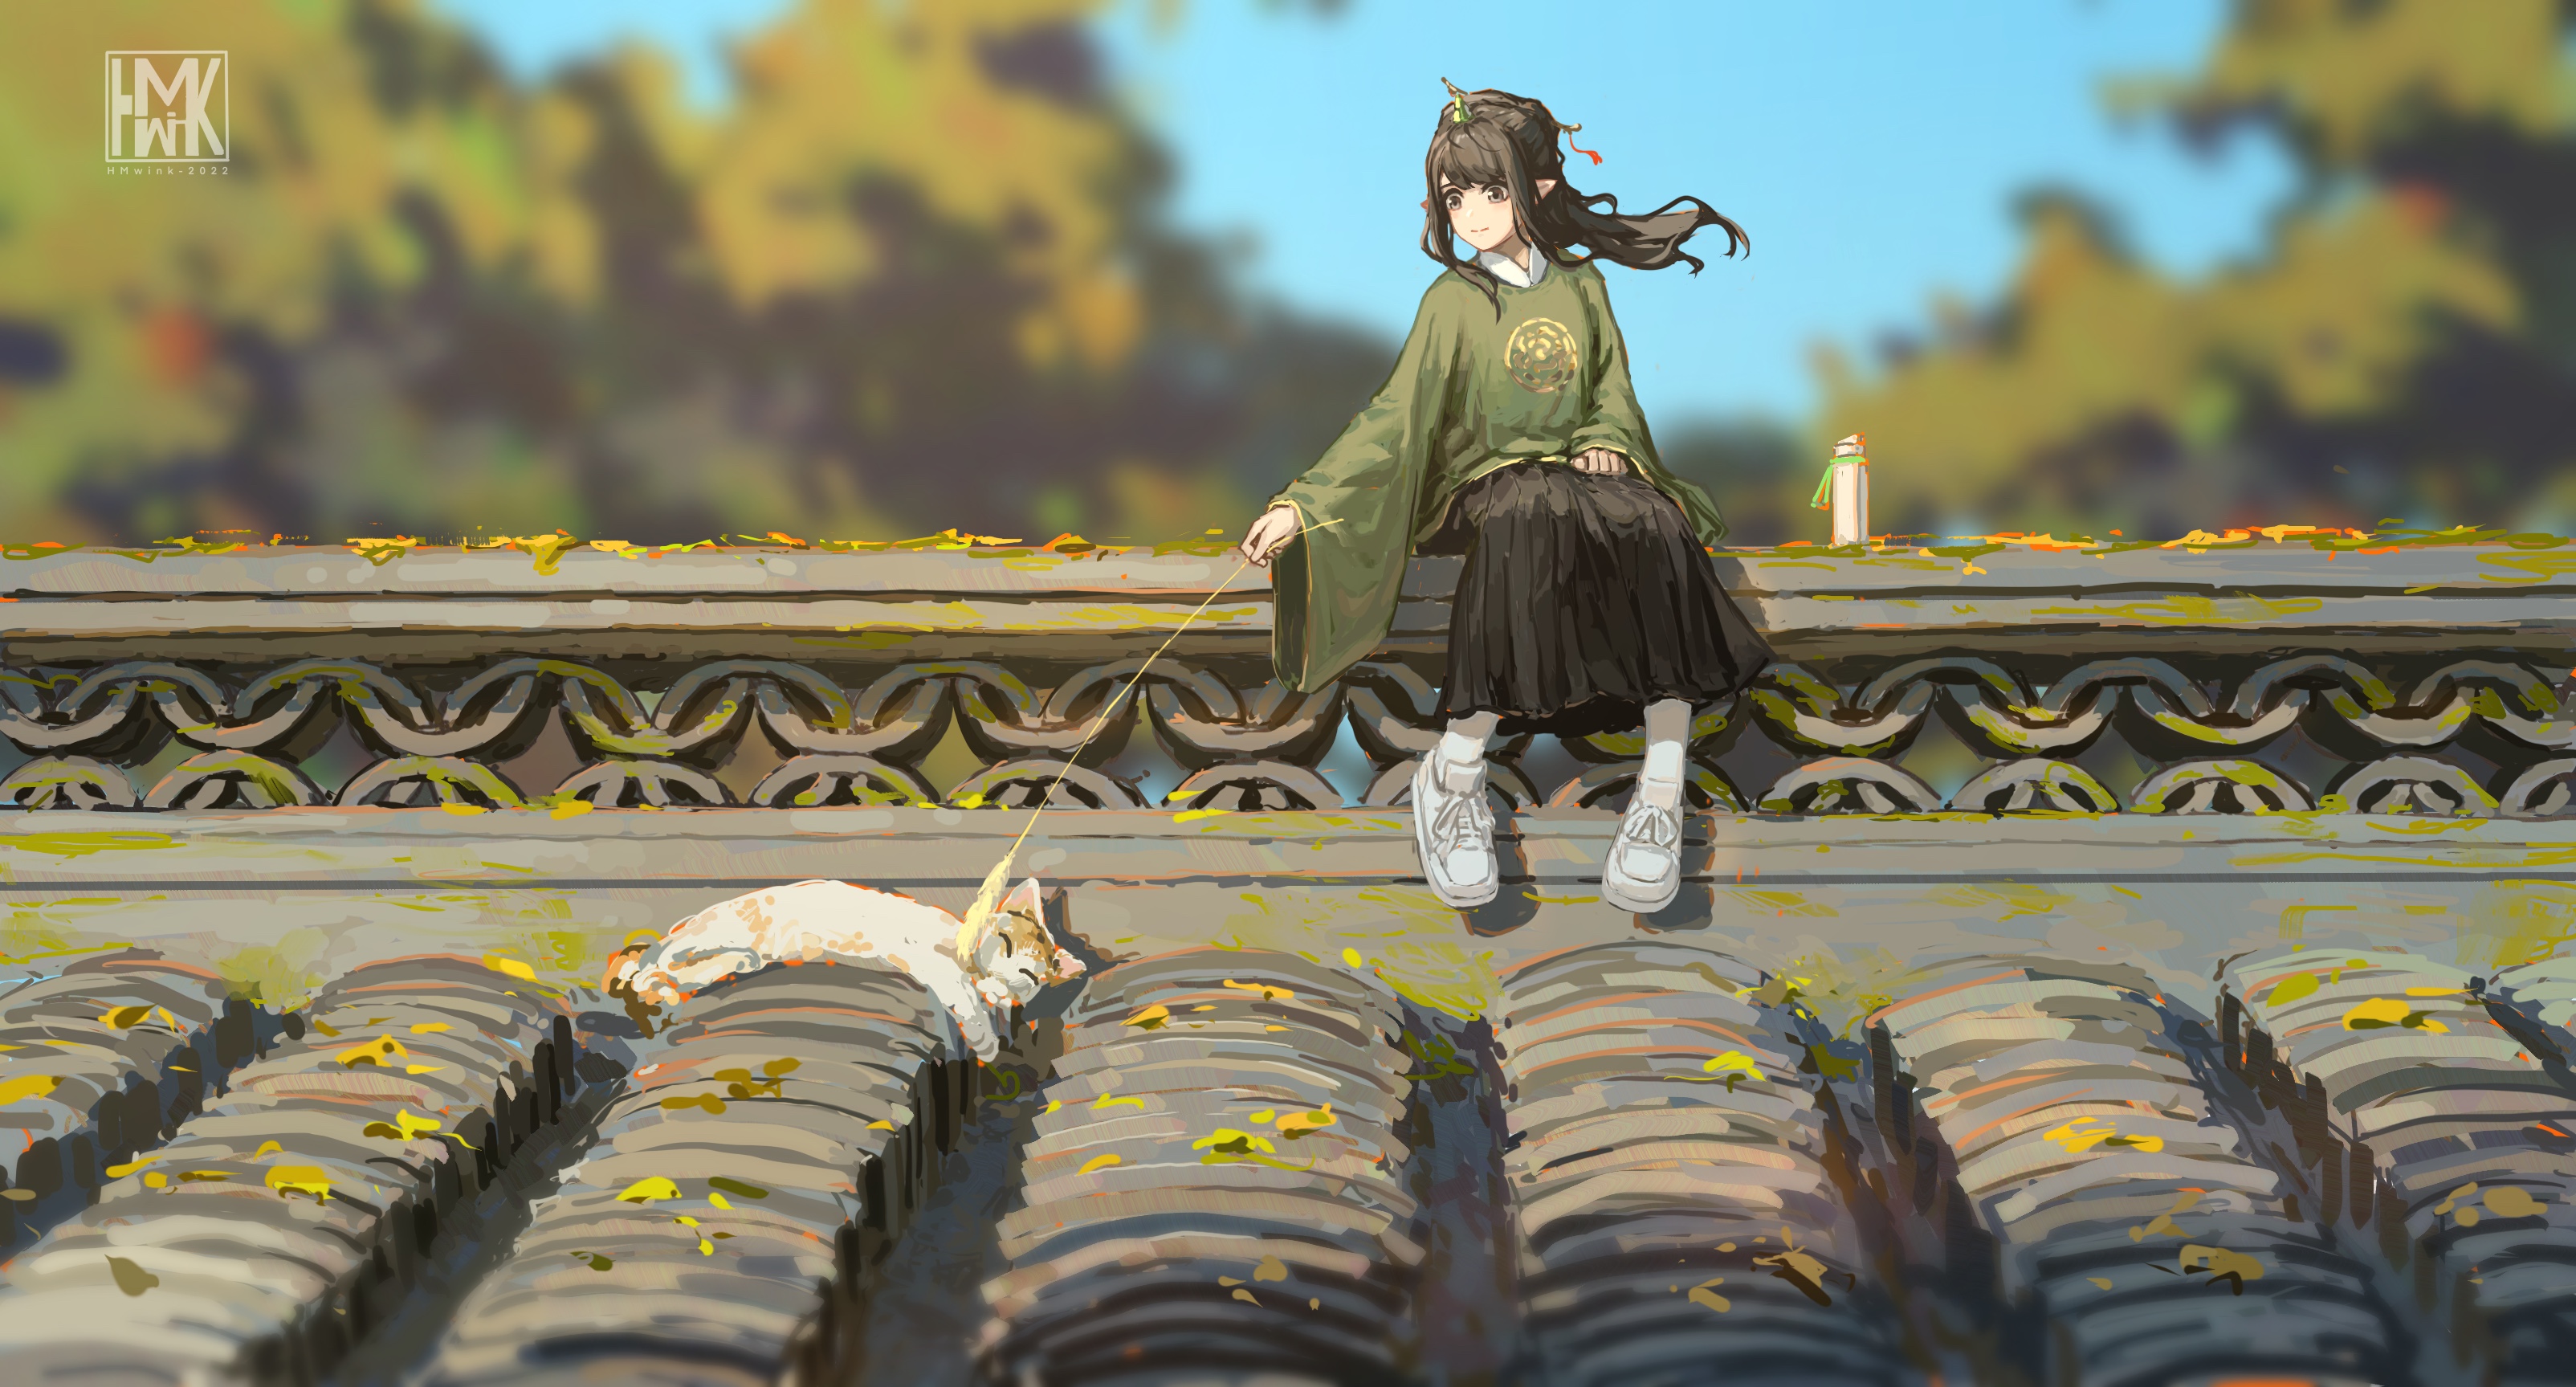 Anime 3208x1727 Hua Ming wink anime girls illustration original characters hanfu Chinese clothing Chinese architecture elves kittens cats sitting rooftops horns black hair black eyes tiles black dress animals women outdoors pointy ears watermarked